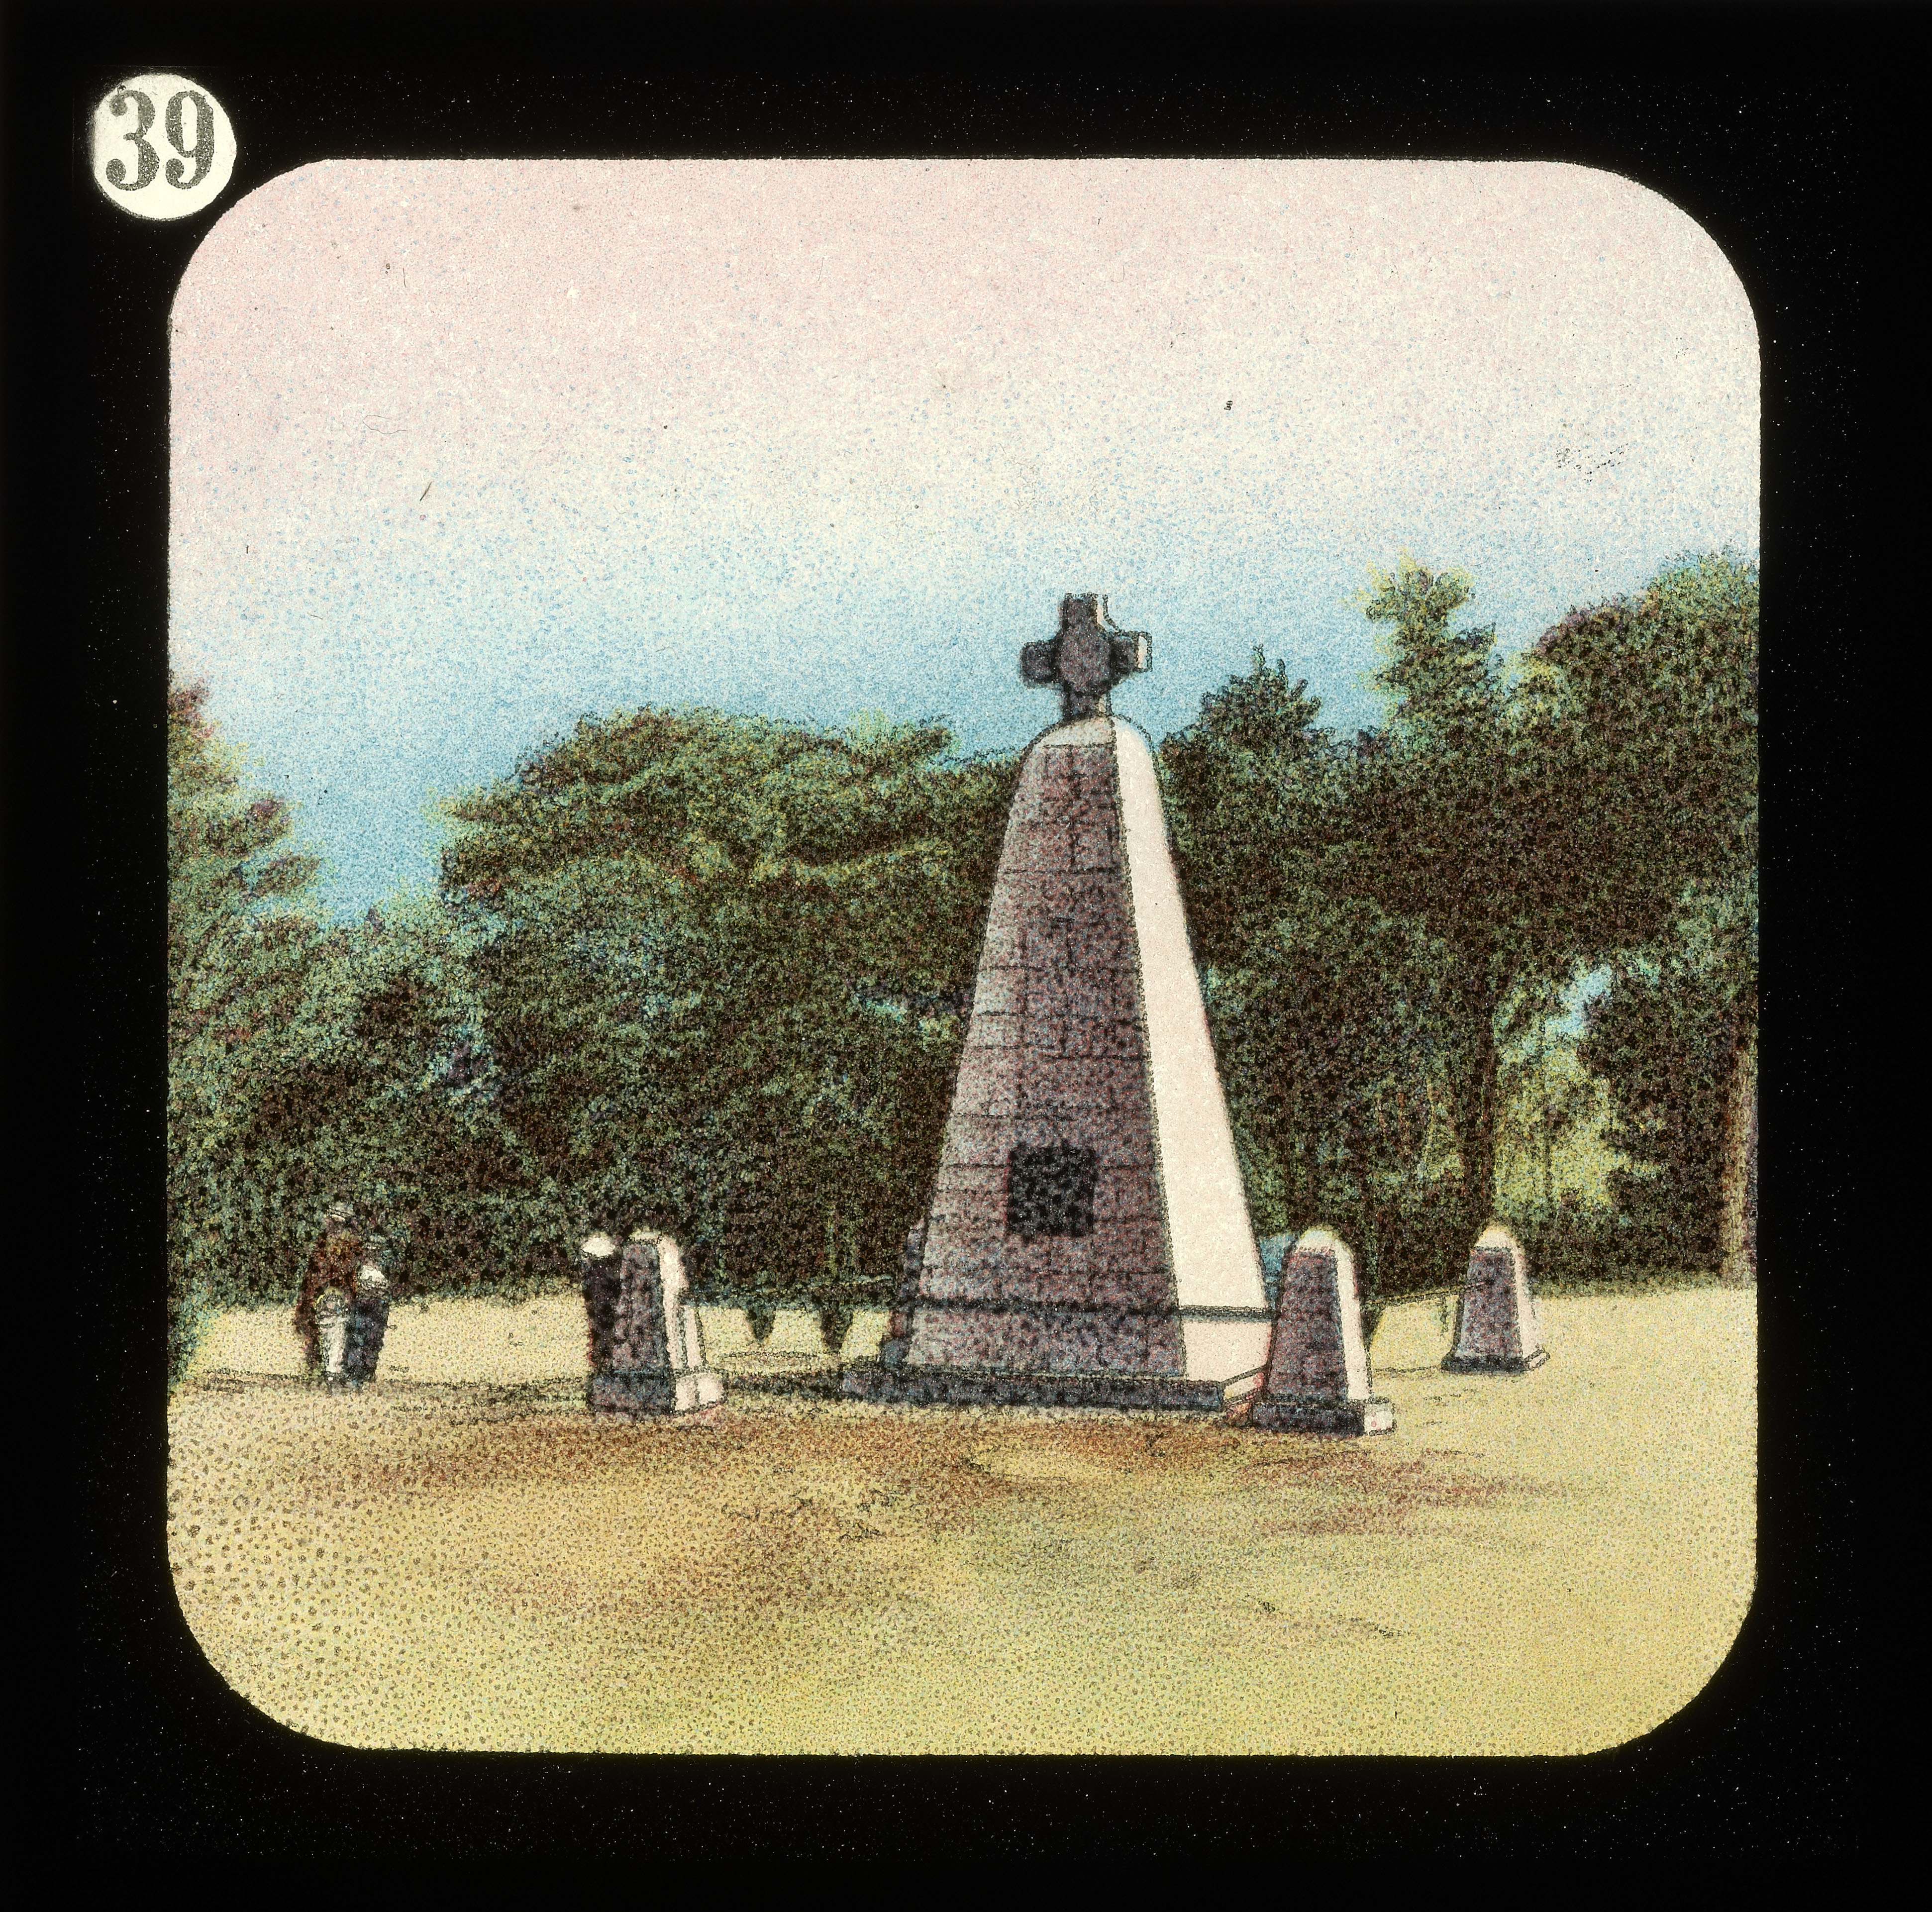 David Livingstone Memorial, Chitambo's Village, Zambia. Lantern Slide from the Life, Adventures, and Work of David Livingstone (Anon. 1900: [39]). Image courtesy of the Smithsonian Libraries, Washington, D.C.